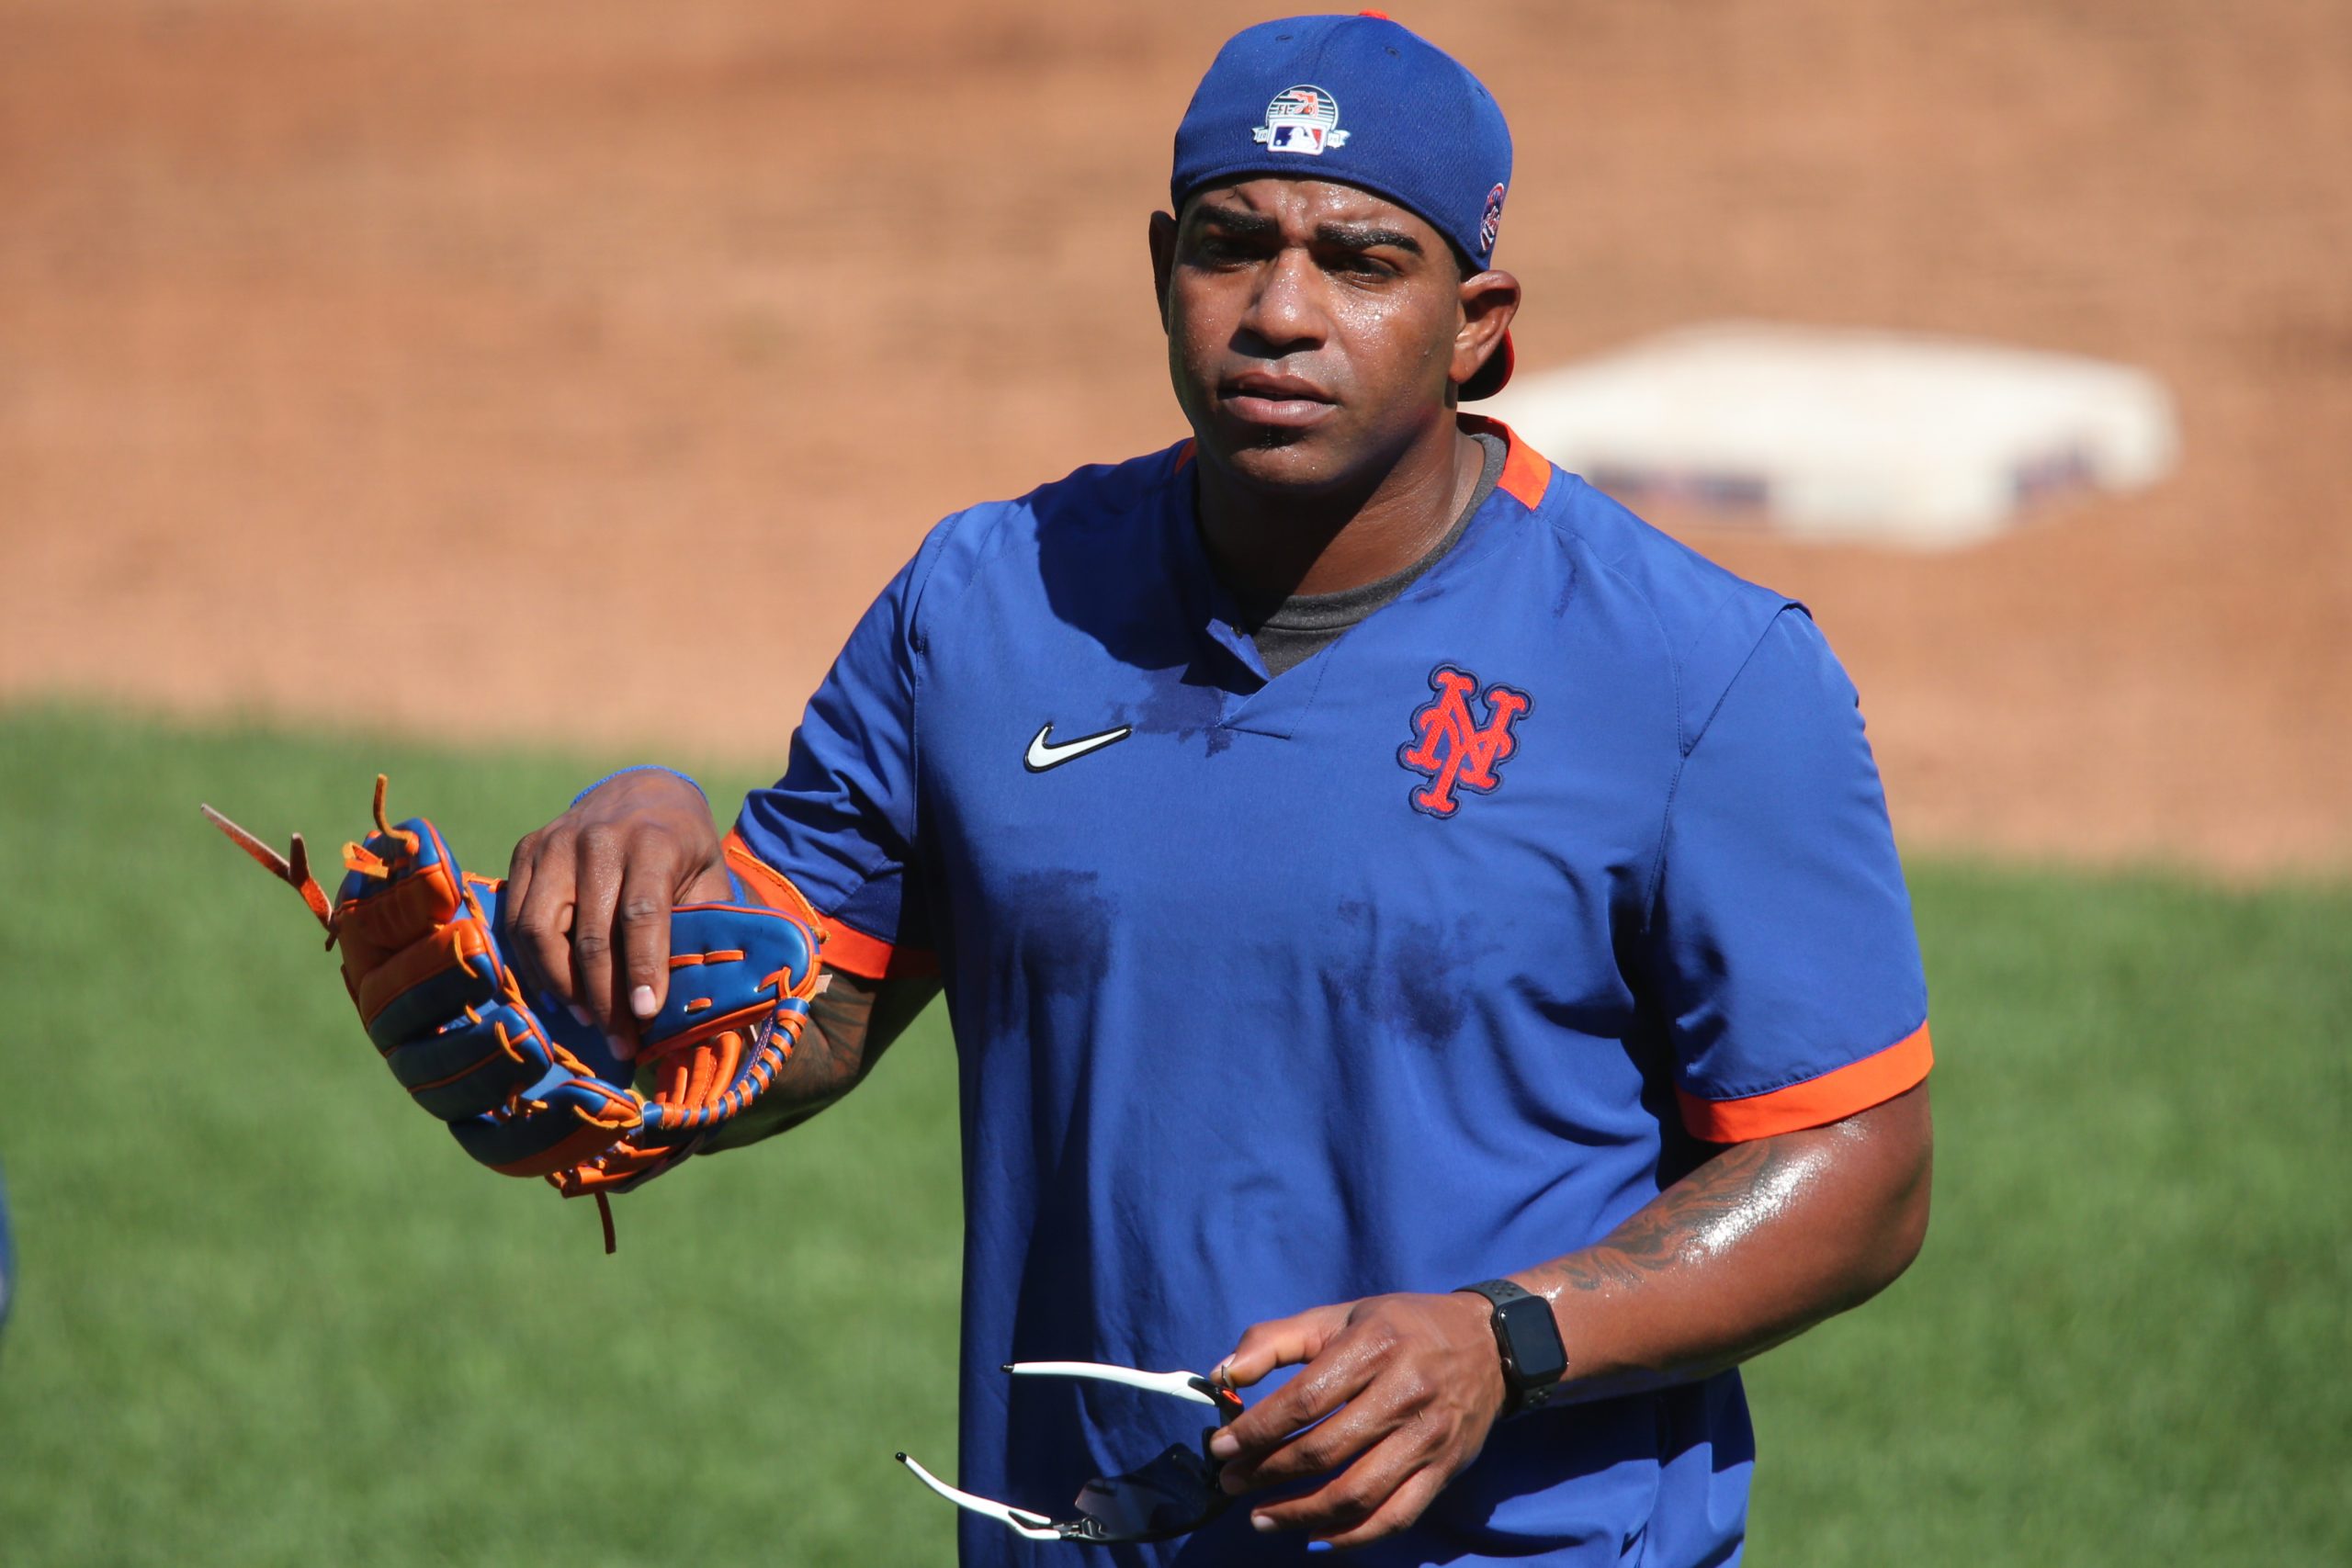 Yoenis Cespedes Receives Athletics Jersey, Works Out With Team for